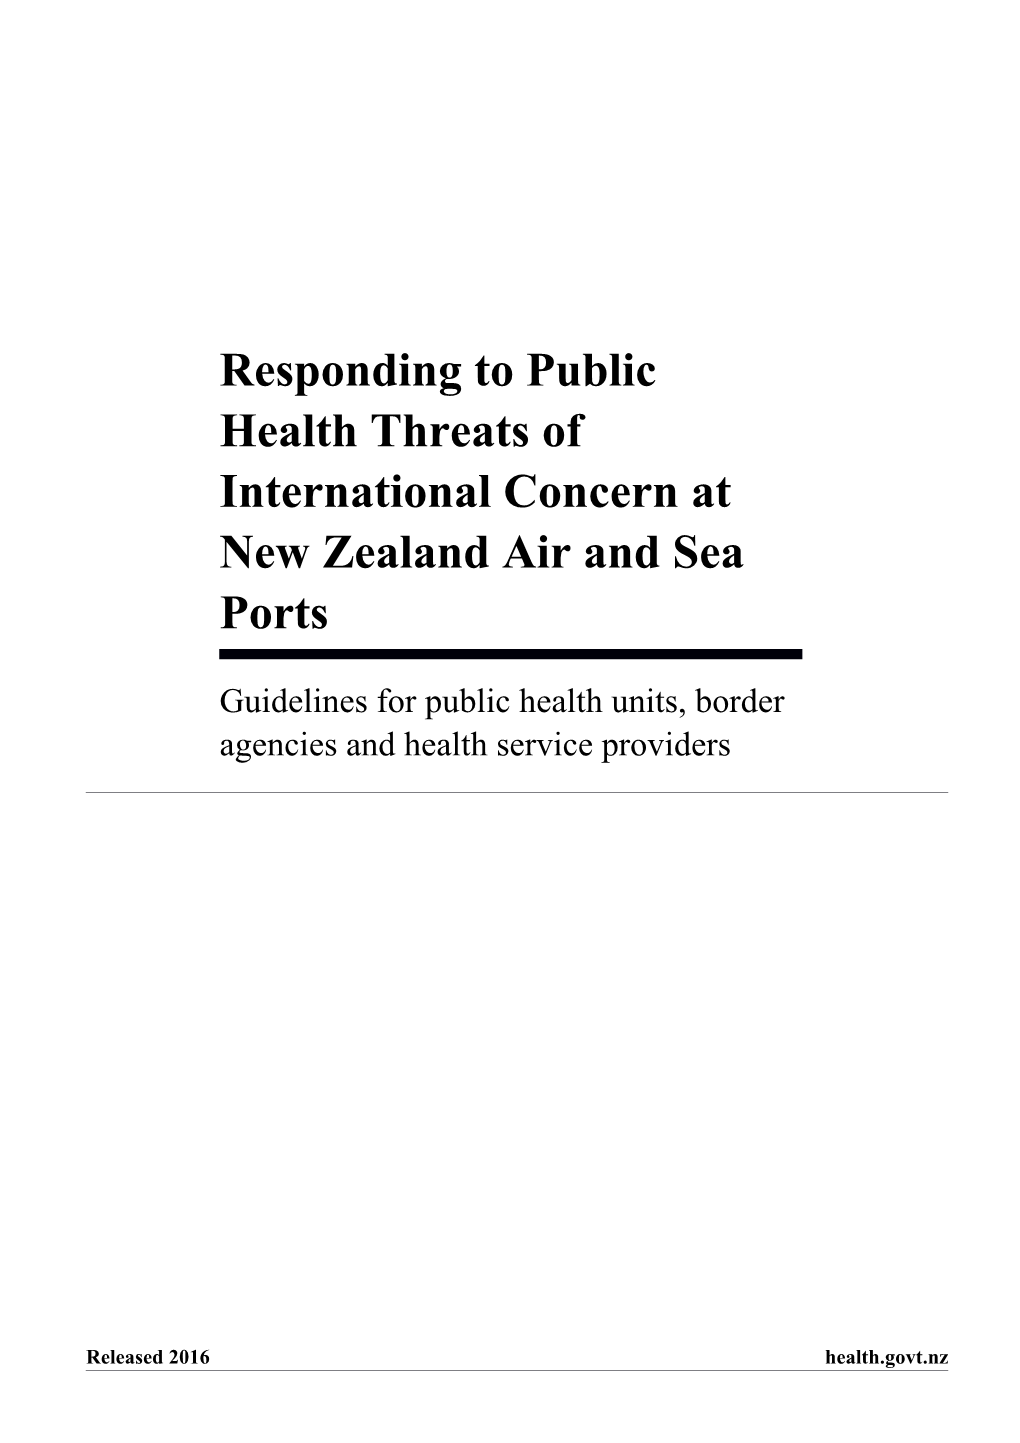 Responding To Public Health Threats Of International Concern At New Zealand Air And Sea Ports